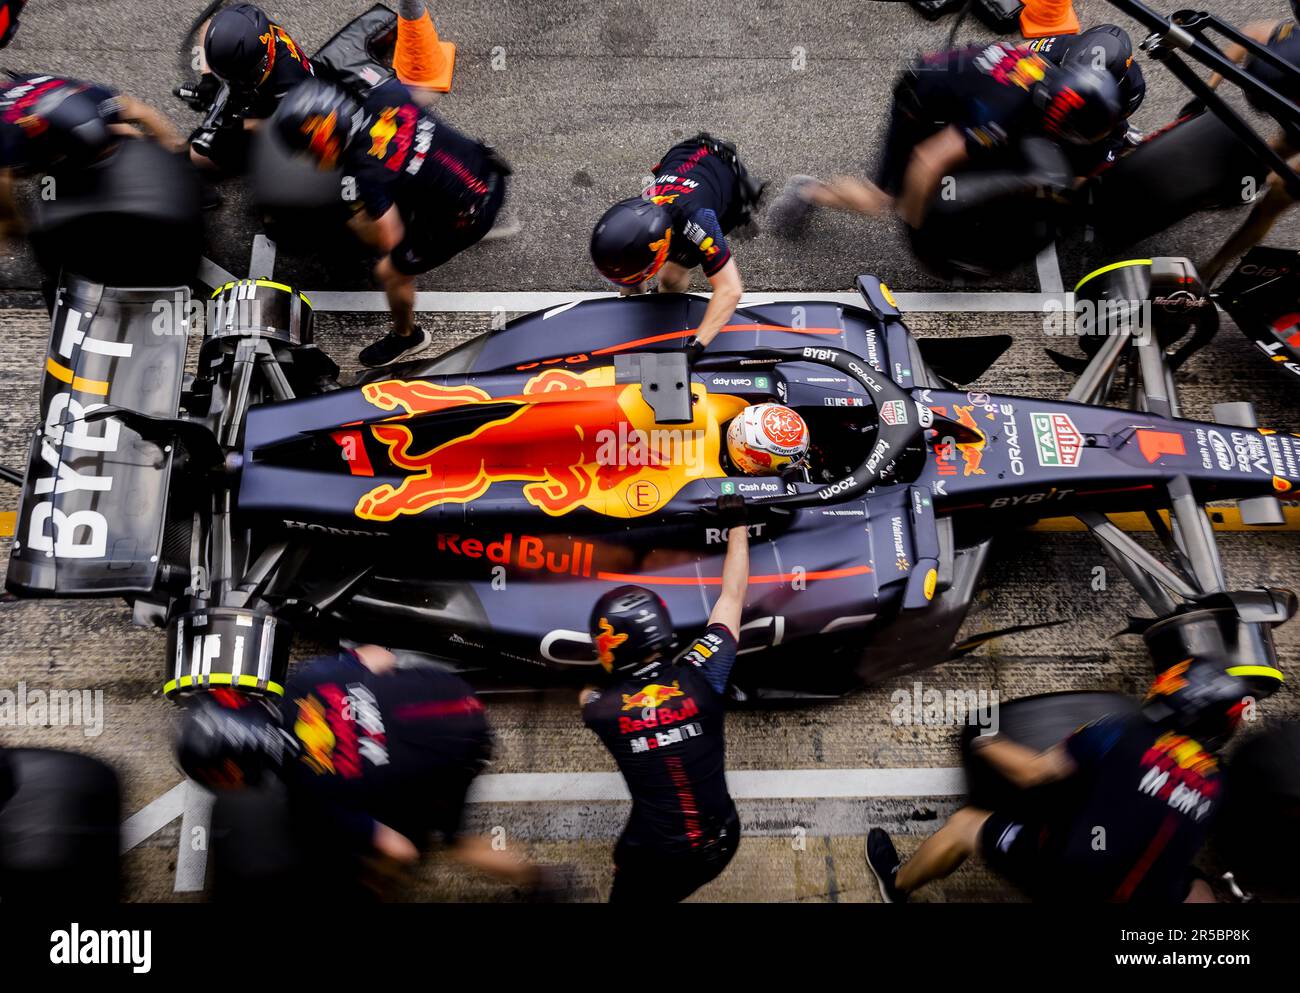 BARCELONA - Max Verstappen (Red Bull Racing) during the 2nd free practice for the Grand Prix of Spain. ANP SEM VAN DER WAL Stock Photo